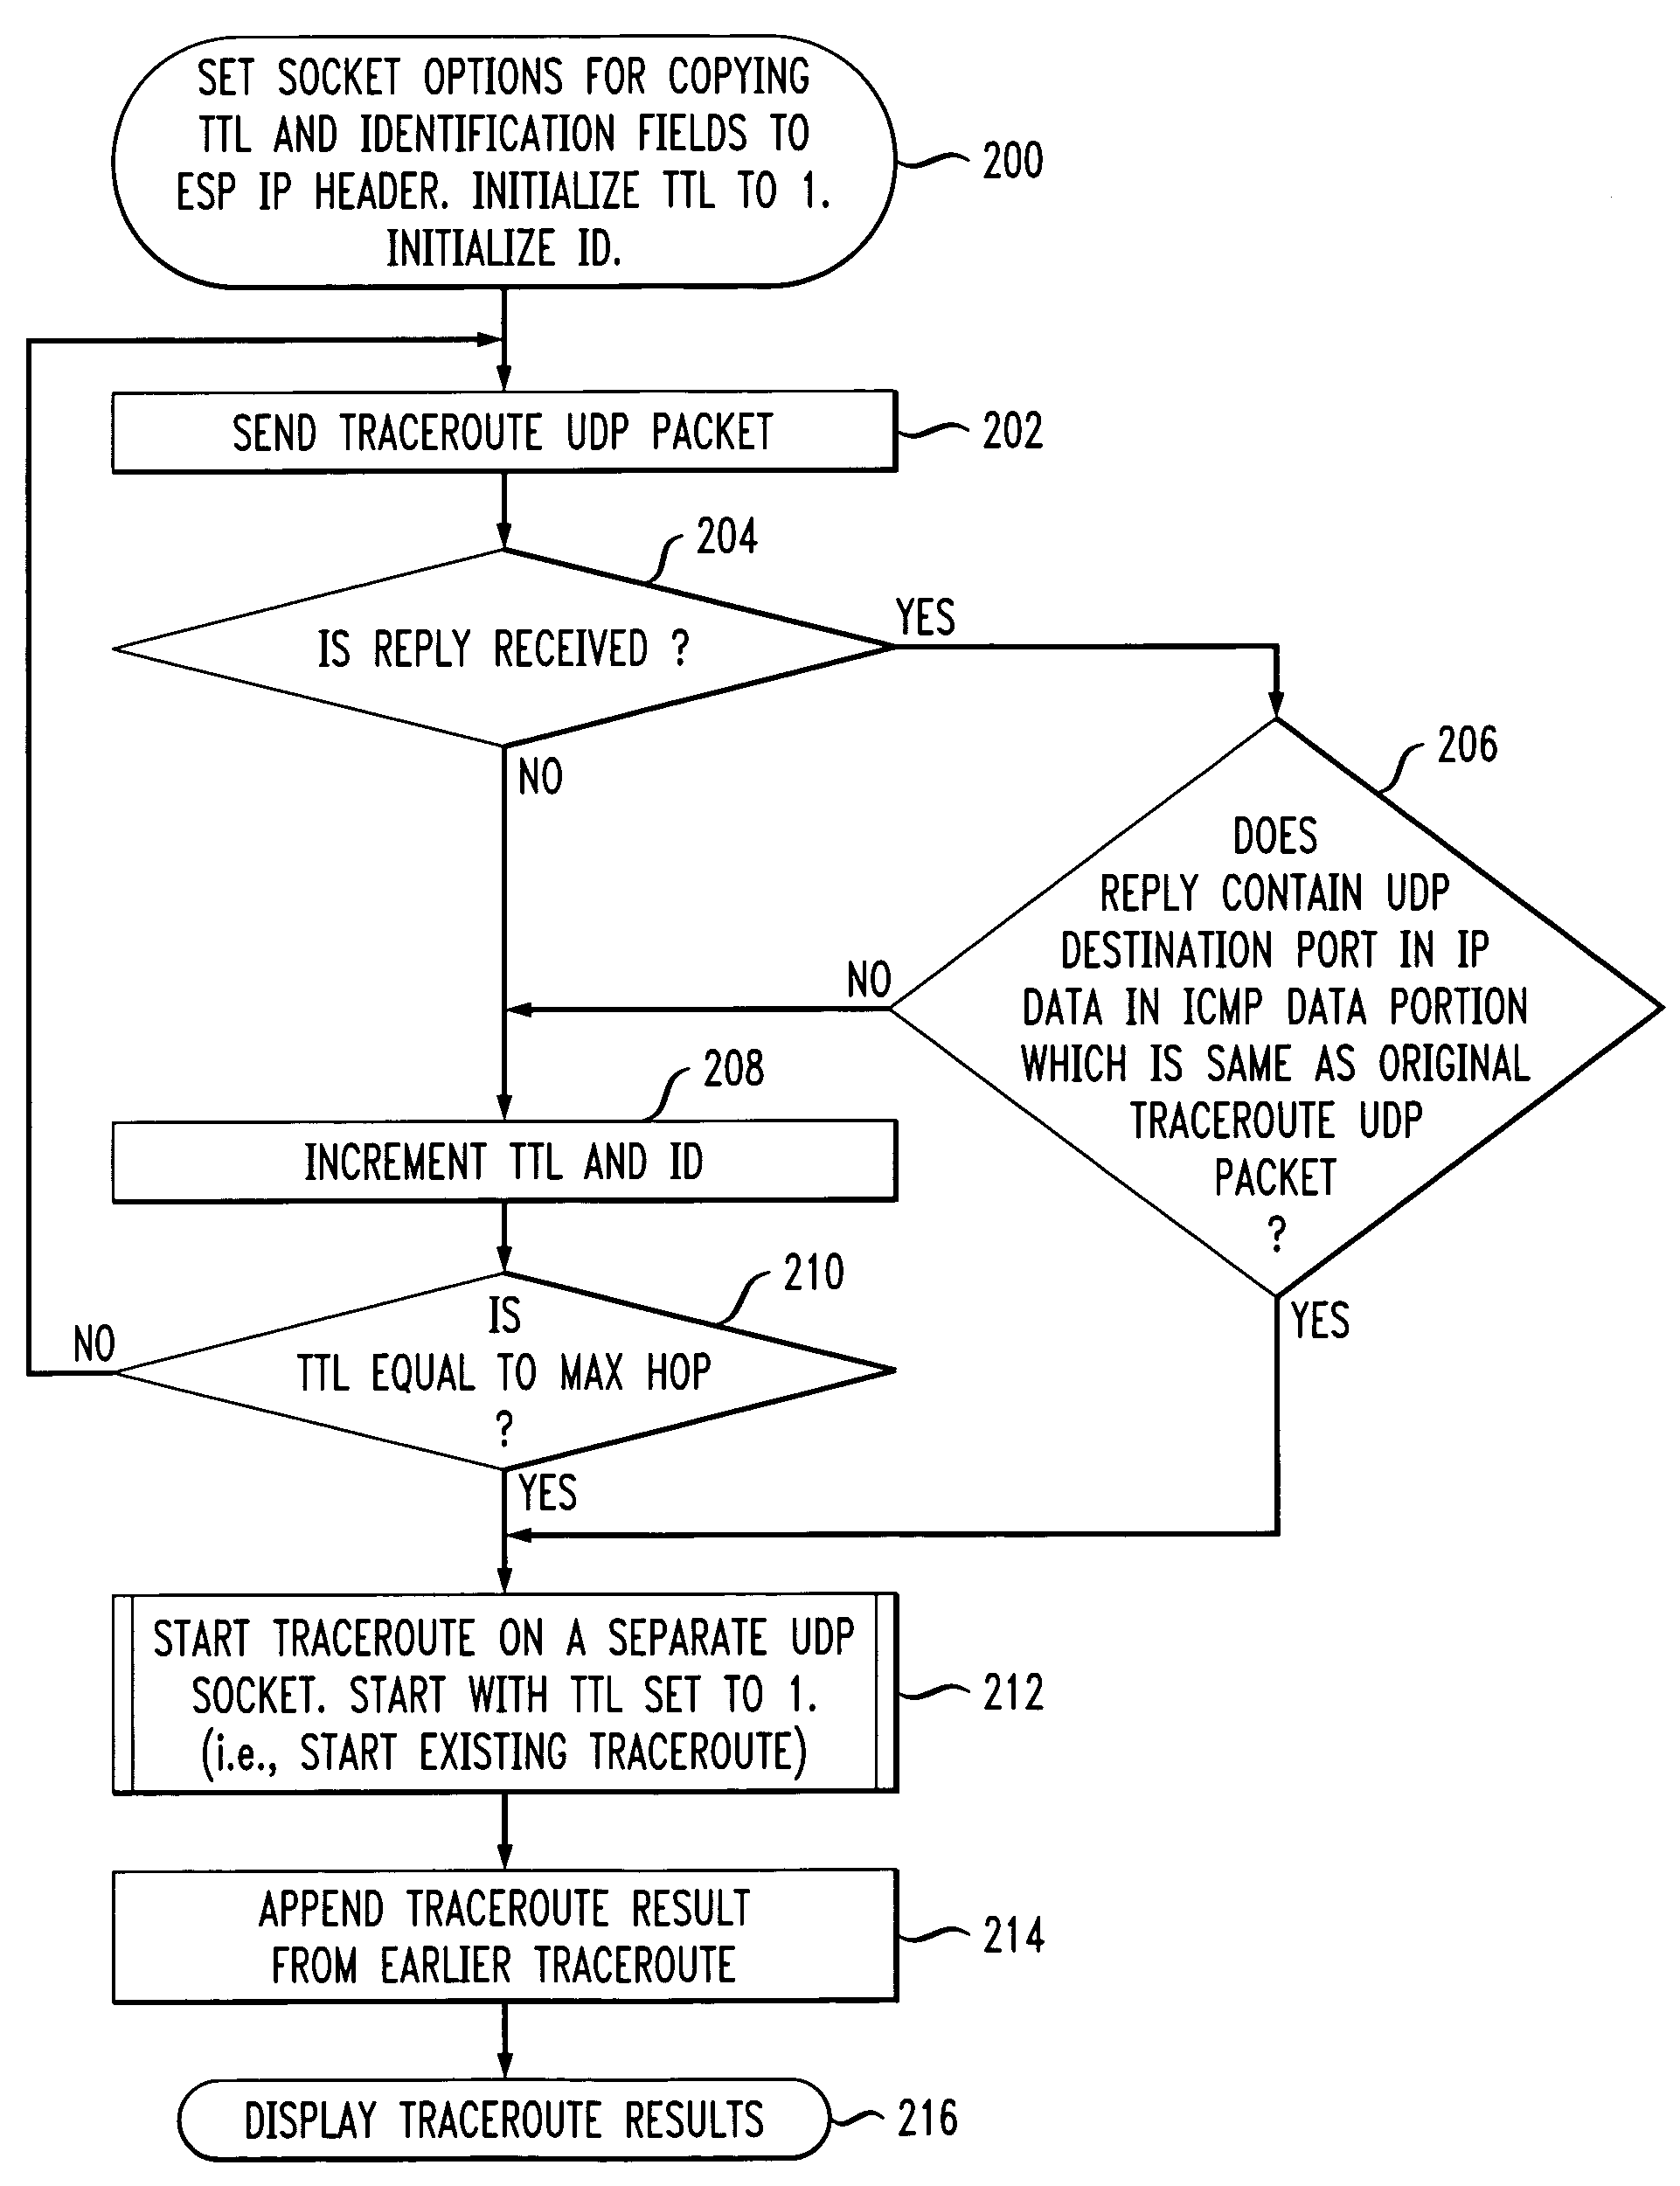 Automatic determination of connectivity problem locations or other network-characterizing information in a network utilizing an encapsulation protocol